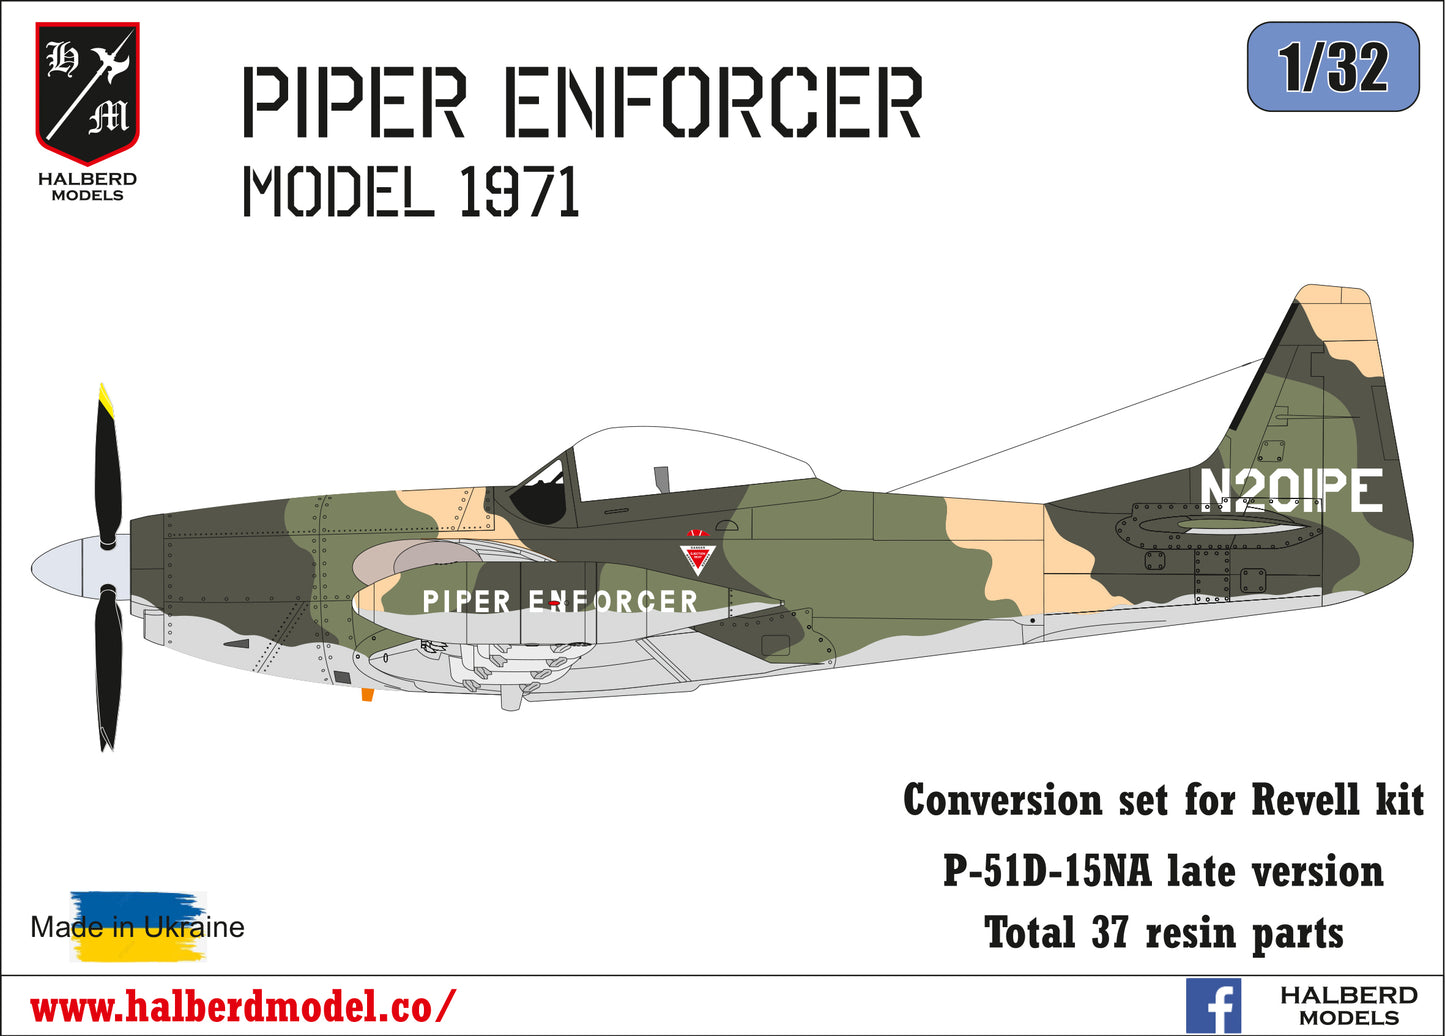 Piper Enforcer (model 1971) conversion set Revell kit P-51D-15NA "late version" 1/32 scale